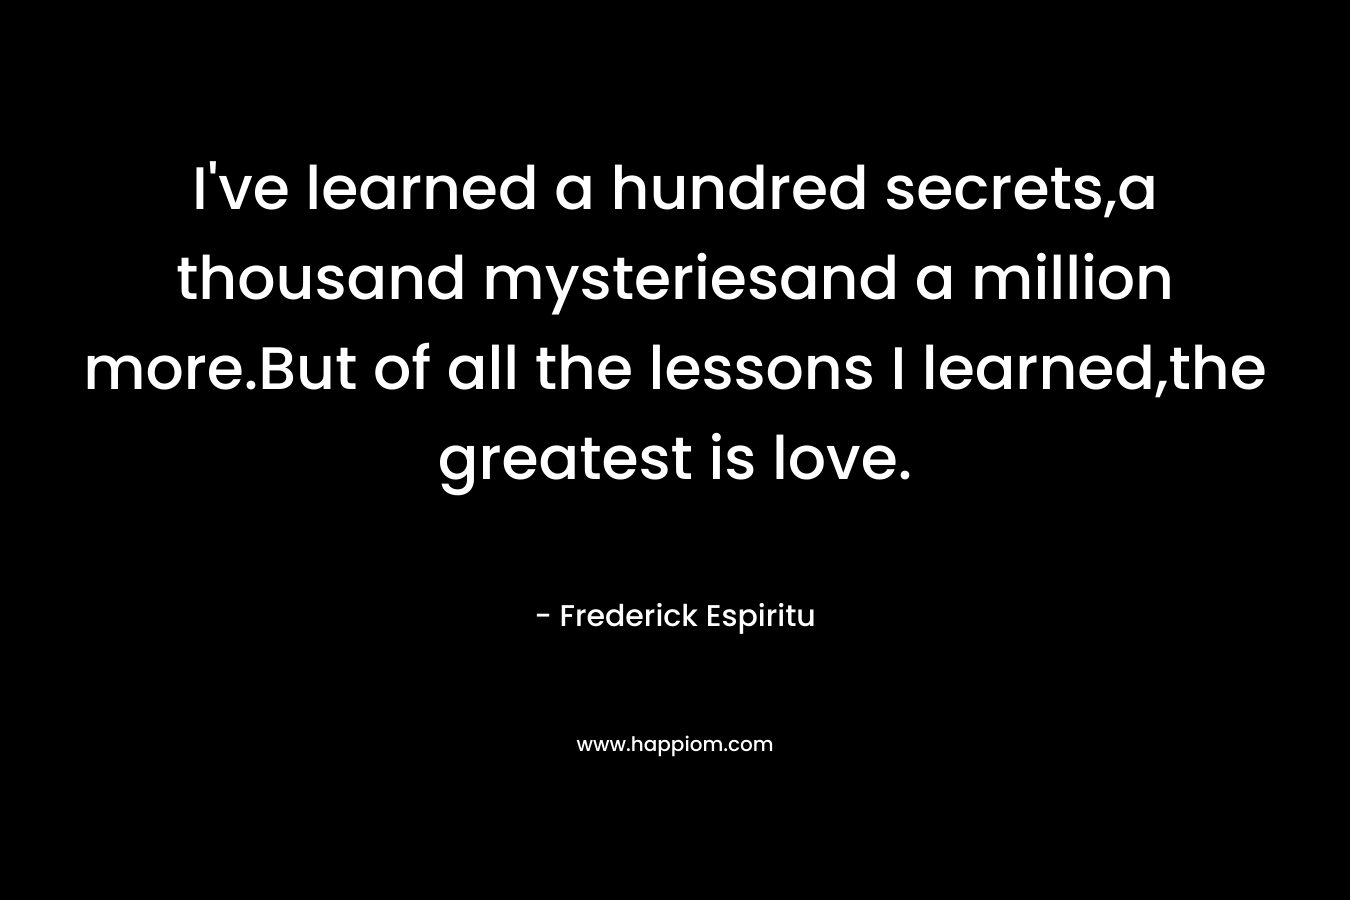 I’ve learned a hundred secrets,a thousand mysteriesand a million more.But of all the lessons I learned,the greatest is love. – Frederick Espiritu